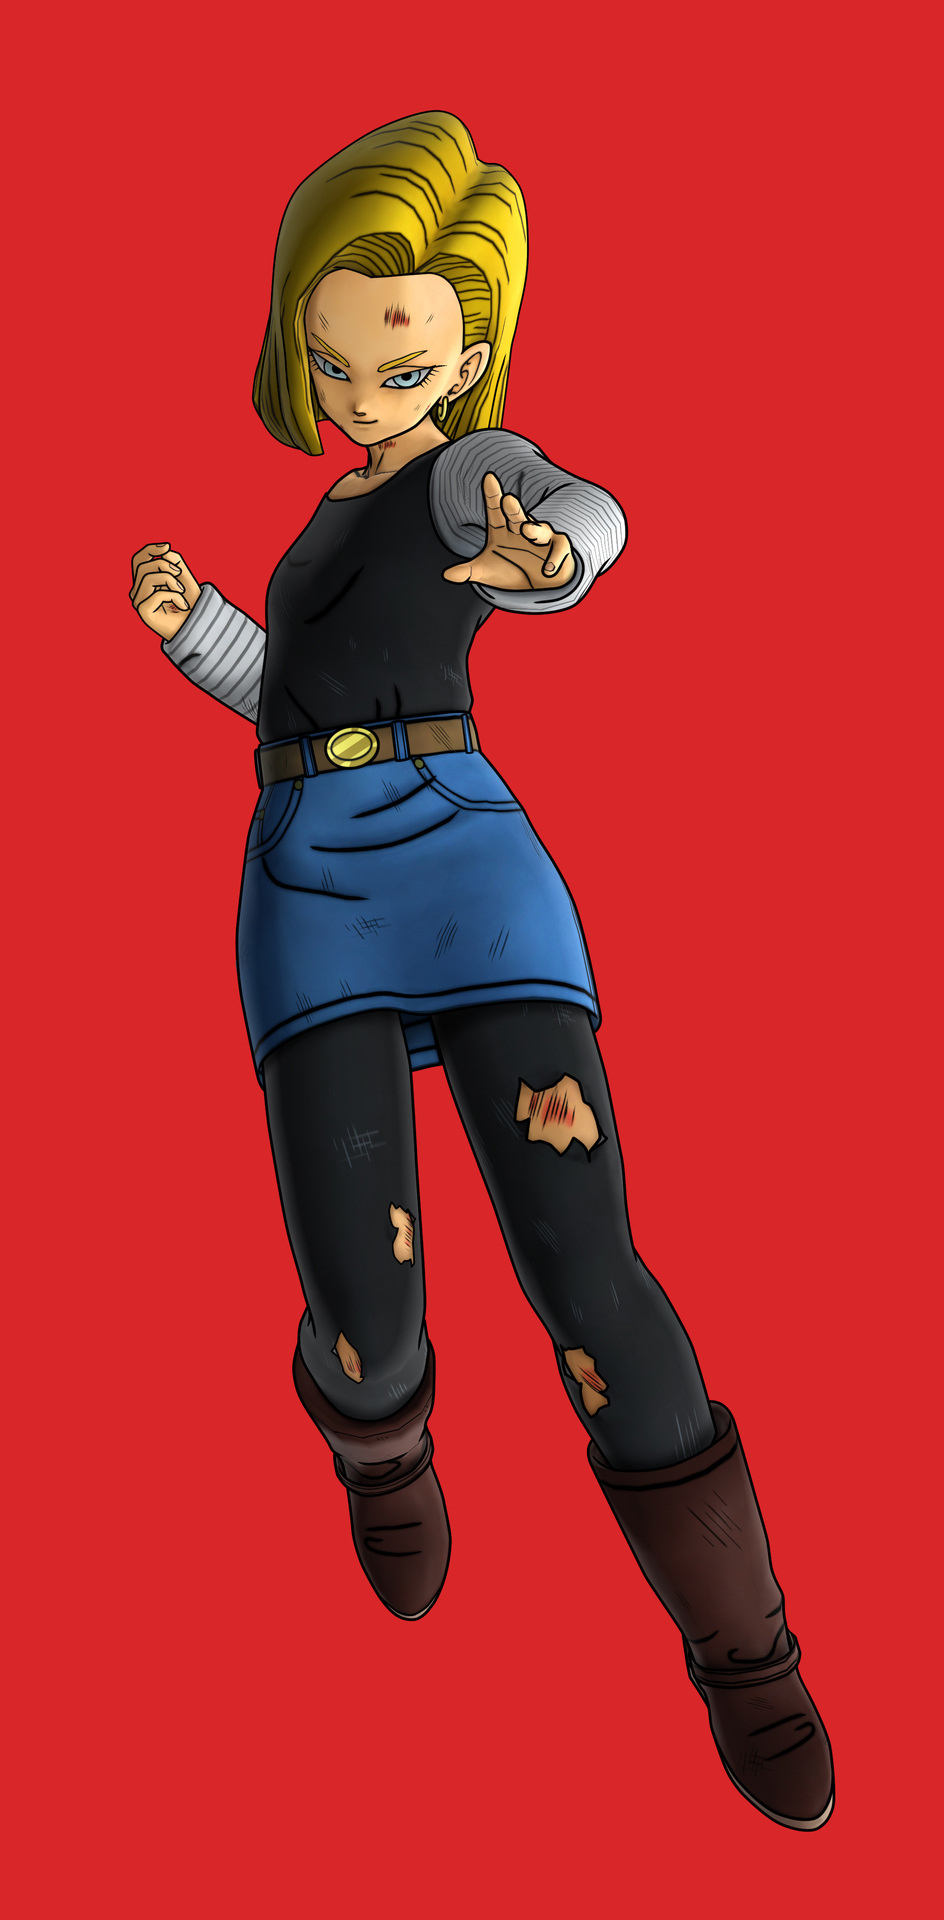 Android18 Ultimate Tenkaichi Red Artwork - Android 18 Db Xenoverse , HD Wallpaper & Backgrounds